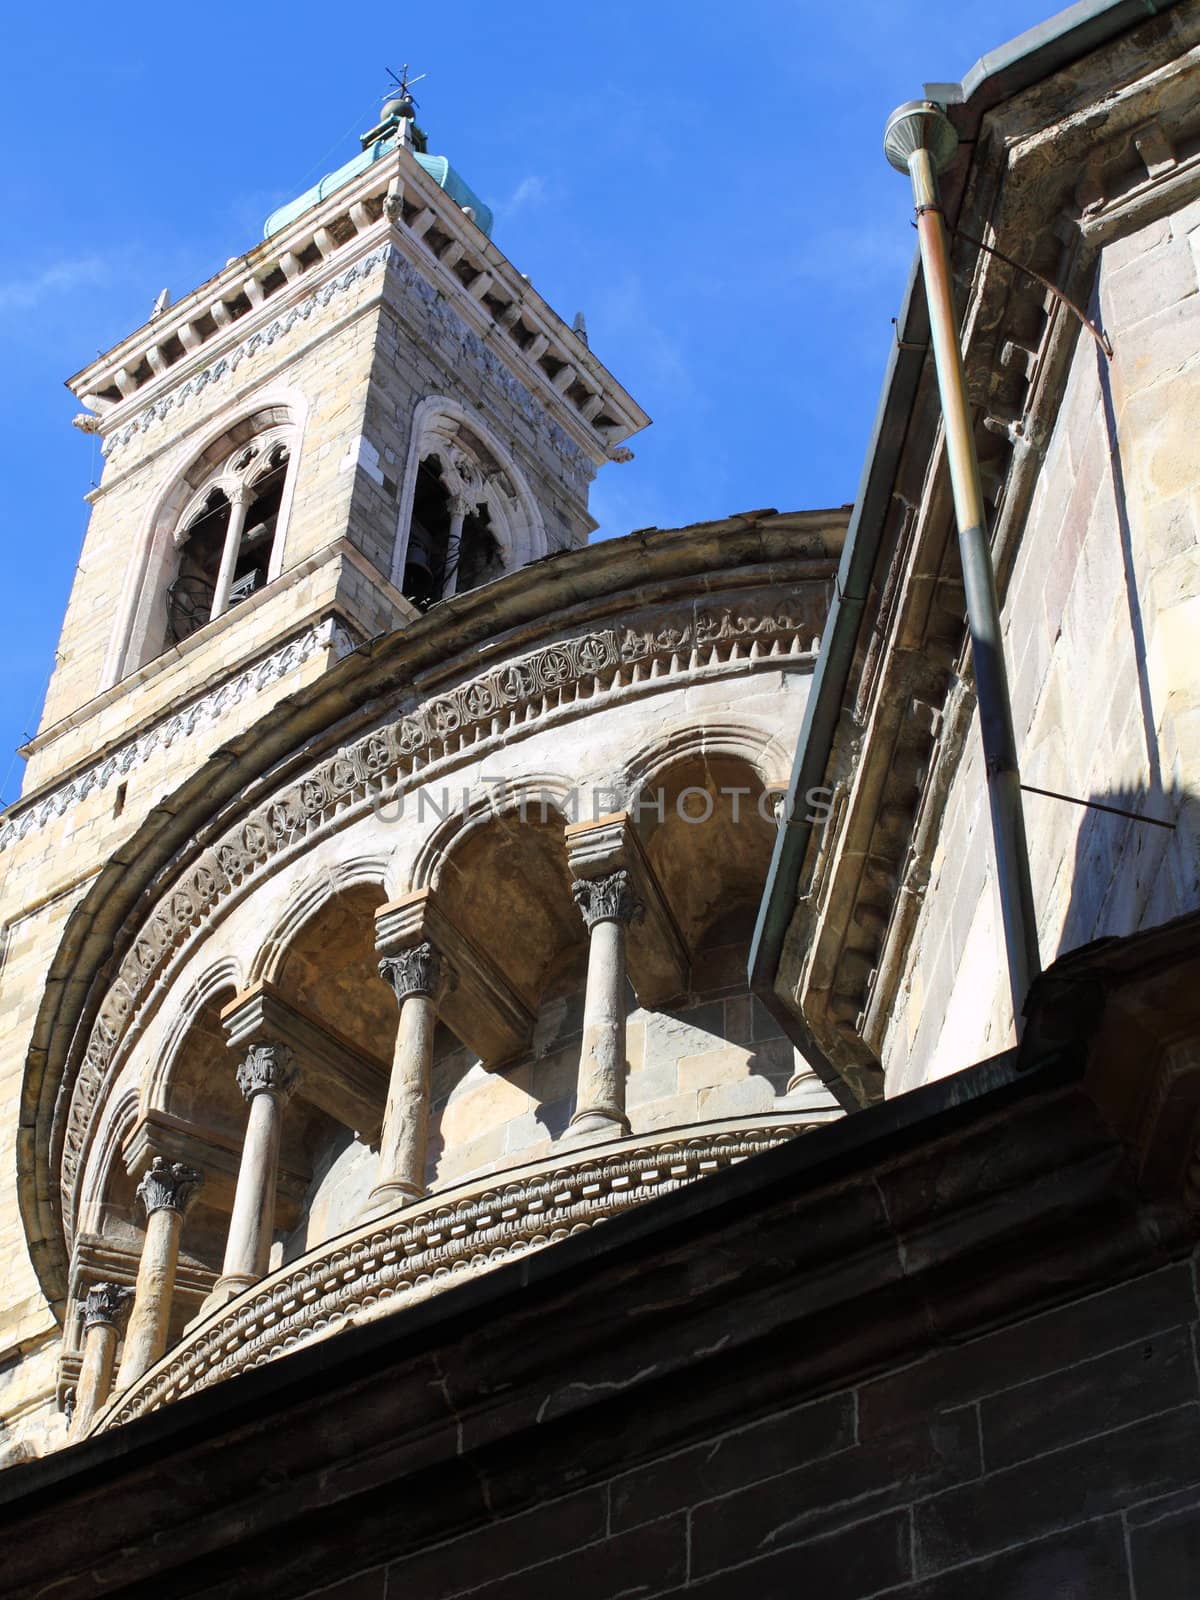 Basilica and tower bell in Bergamo, Lombardy, Italy 